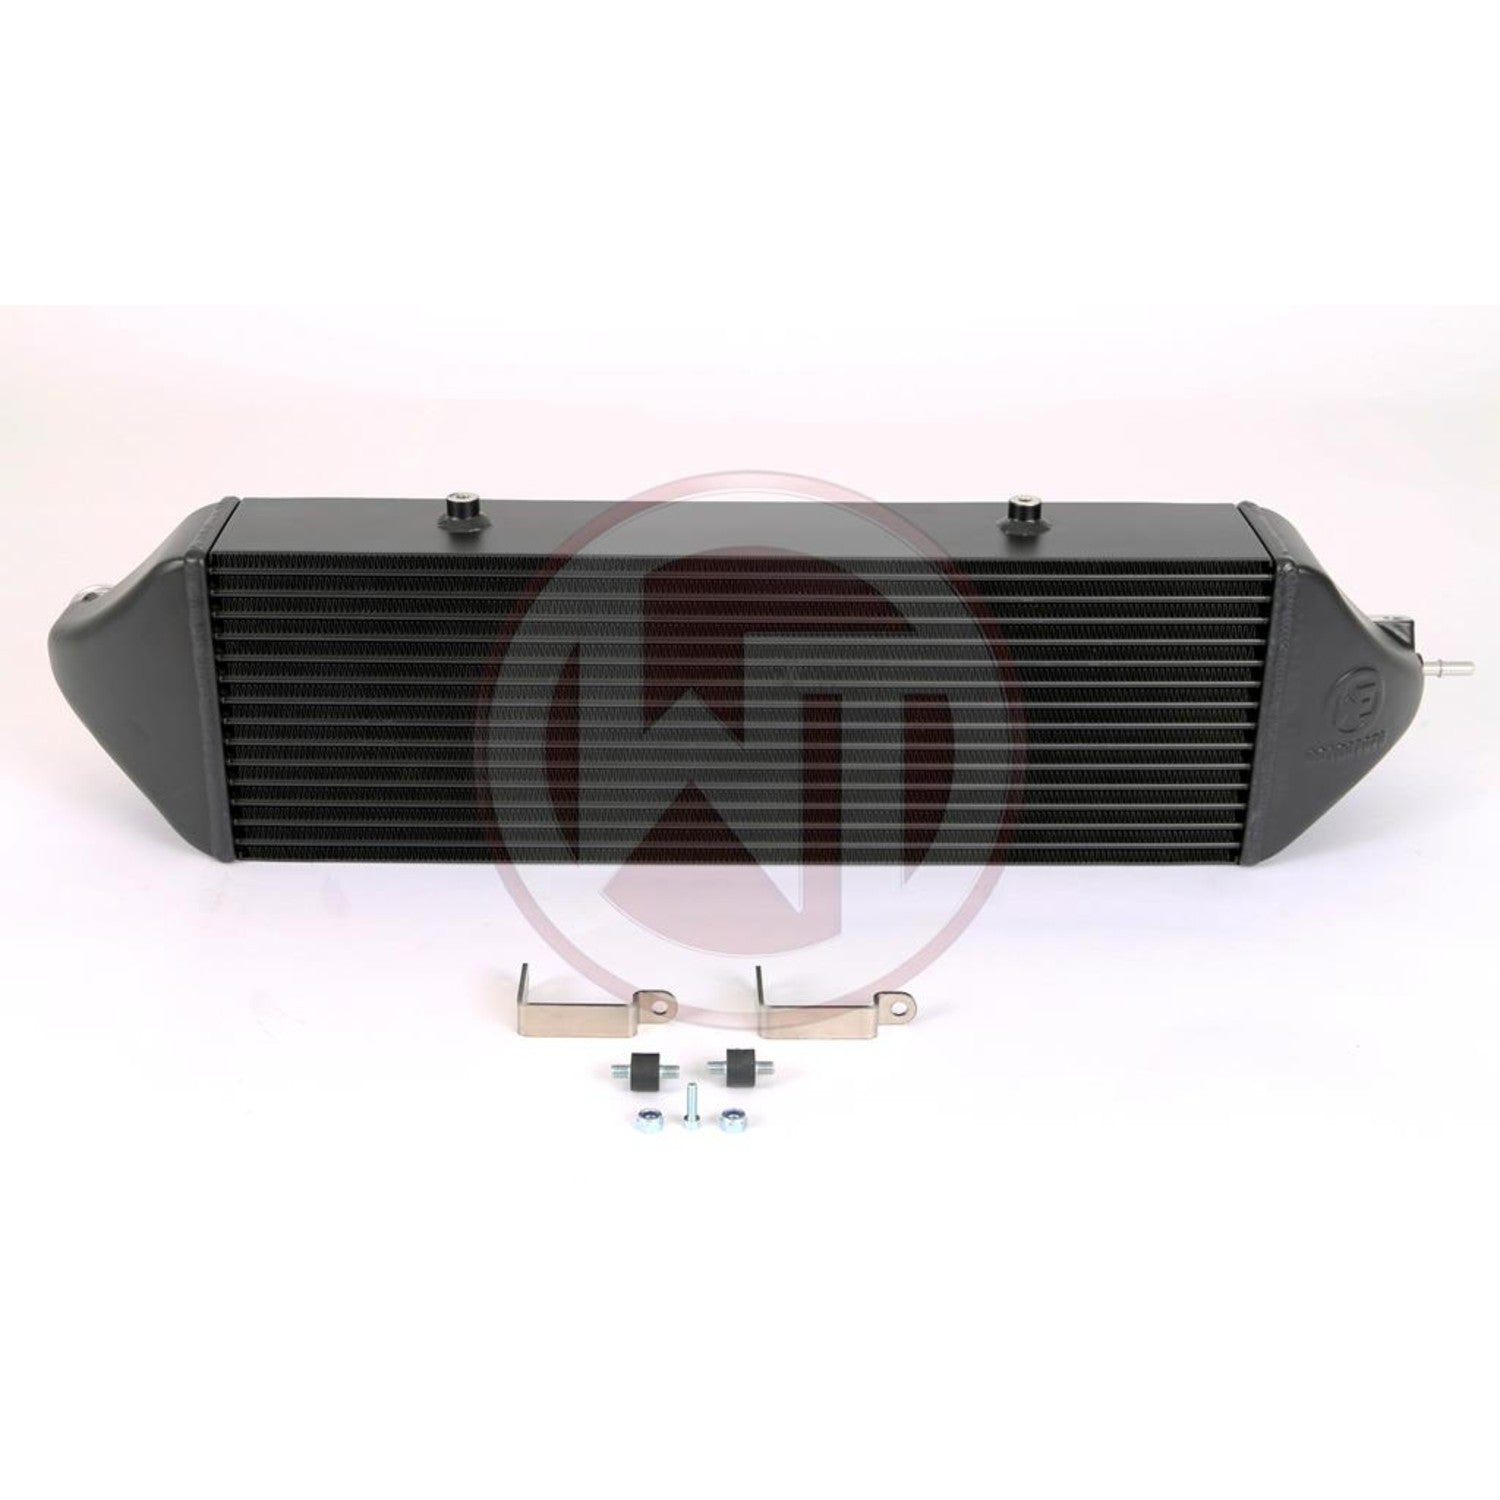 Ford Focus MK3 1.6 Eco Competition Intercooler Kit